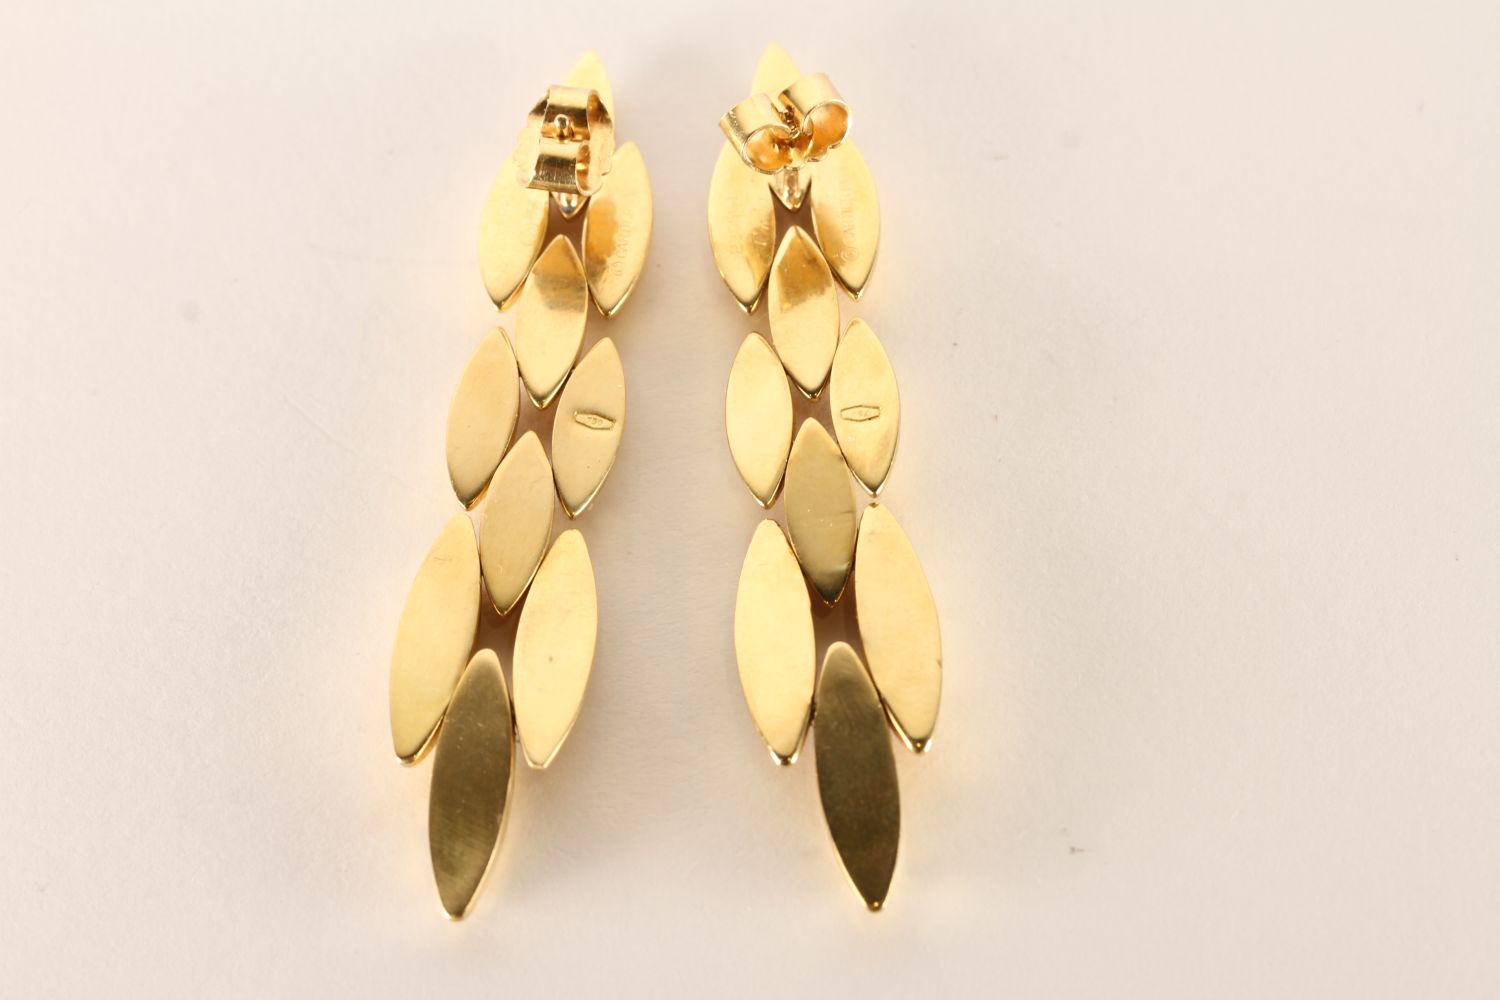 A Pair of 18ct link design earrings, smooth tear drop links, Cartier 1989, B30504 marks, 13.8g - Image 2 of 3